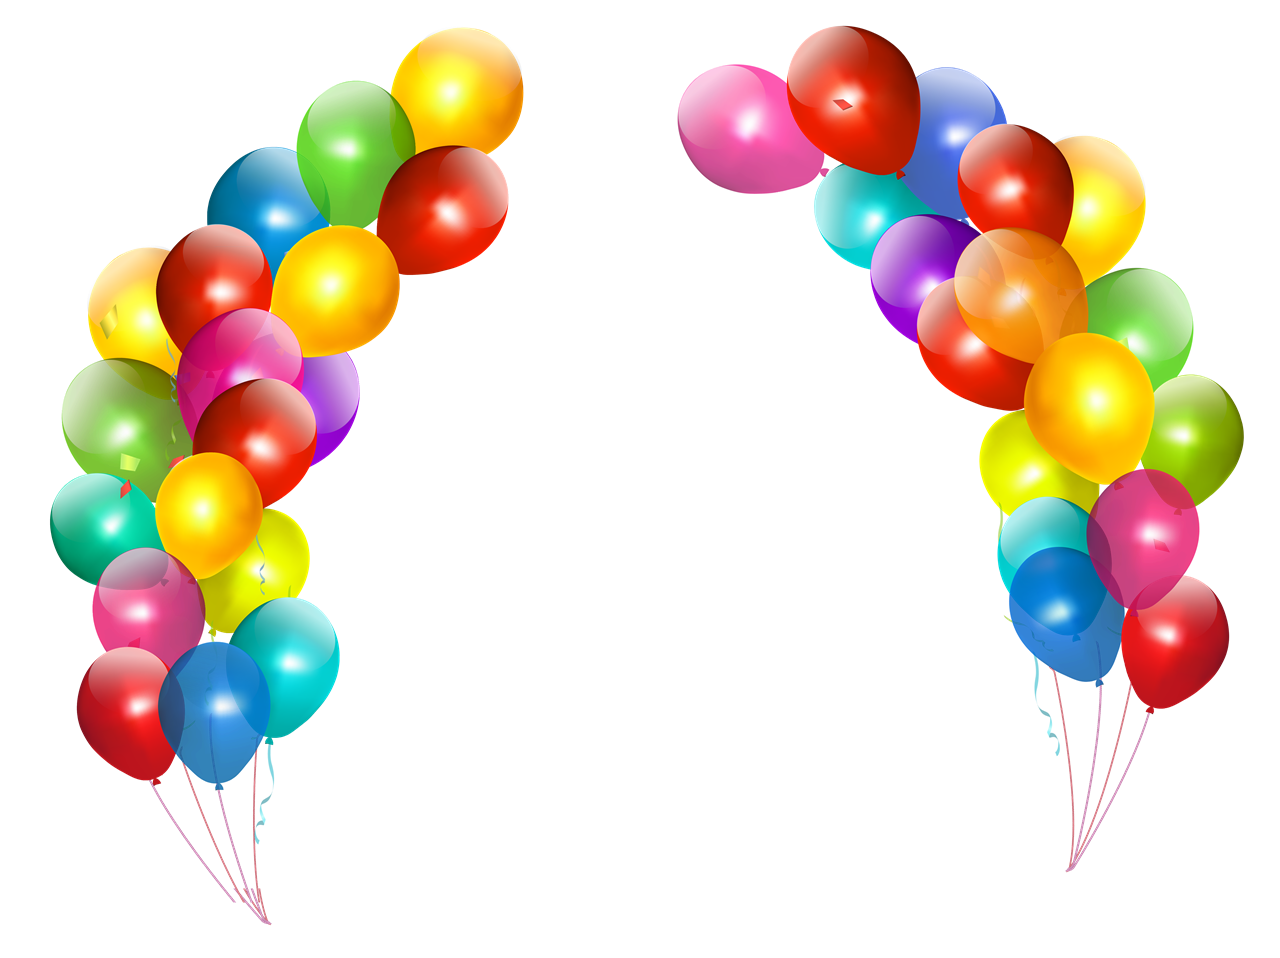 Colorful Balloons PNG Image Background